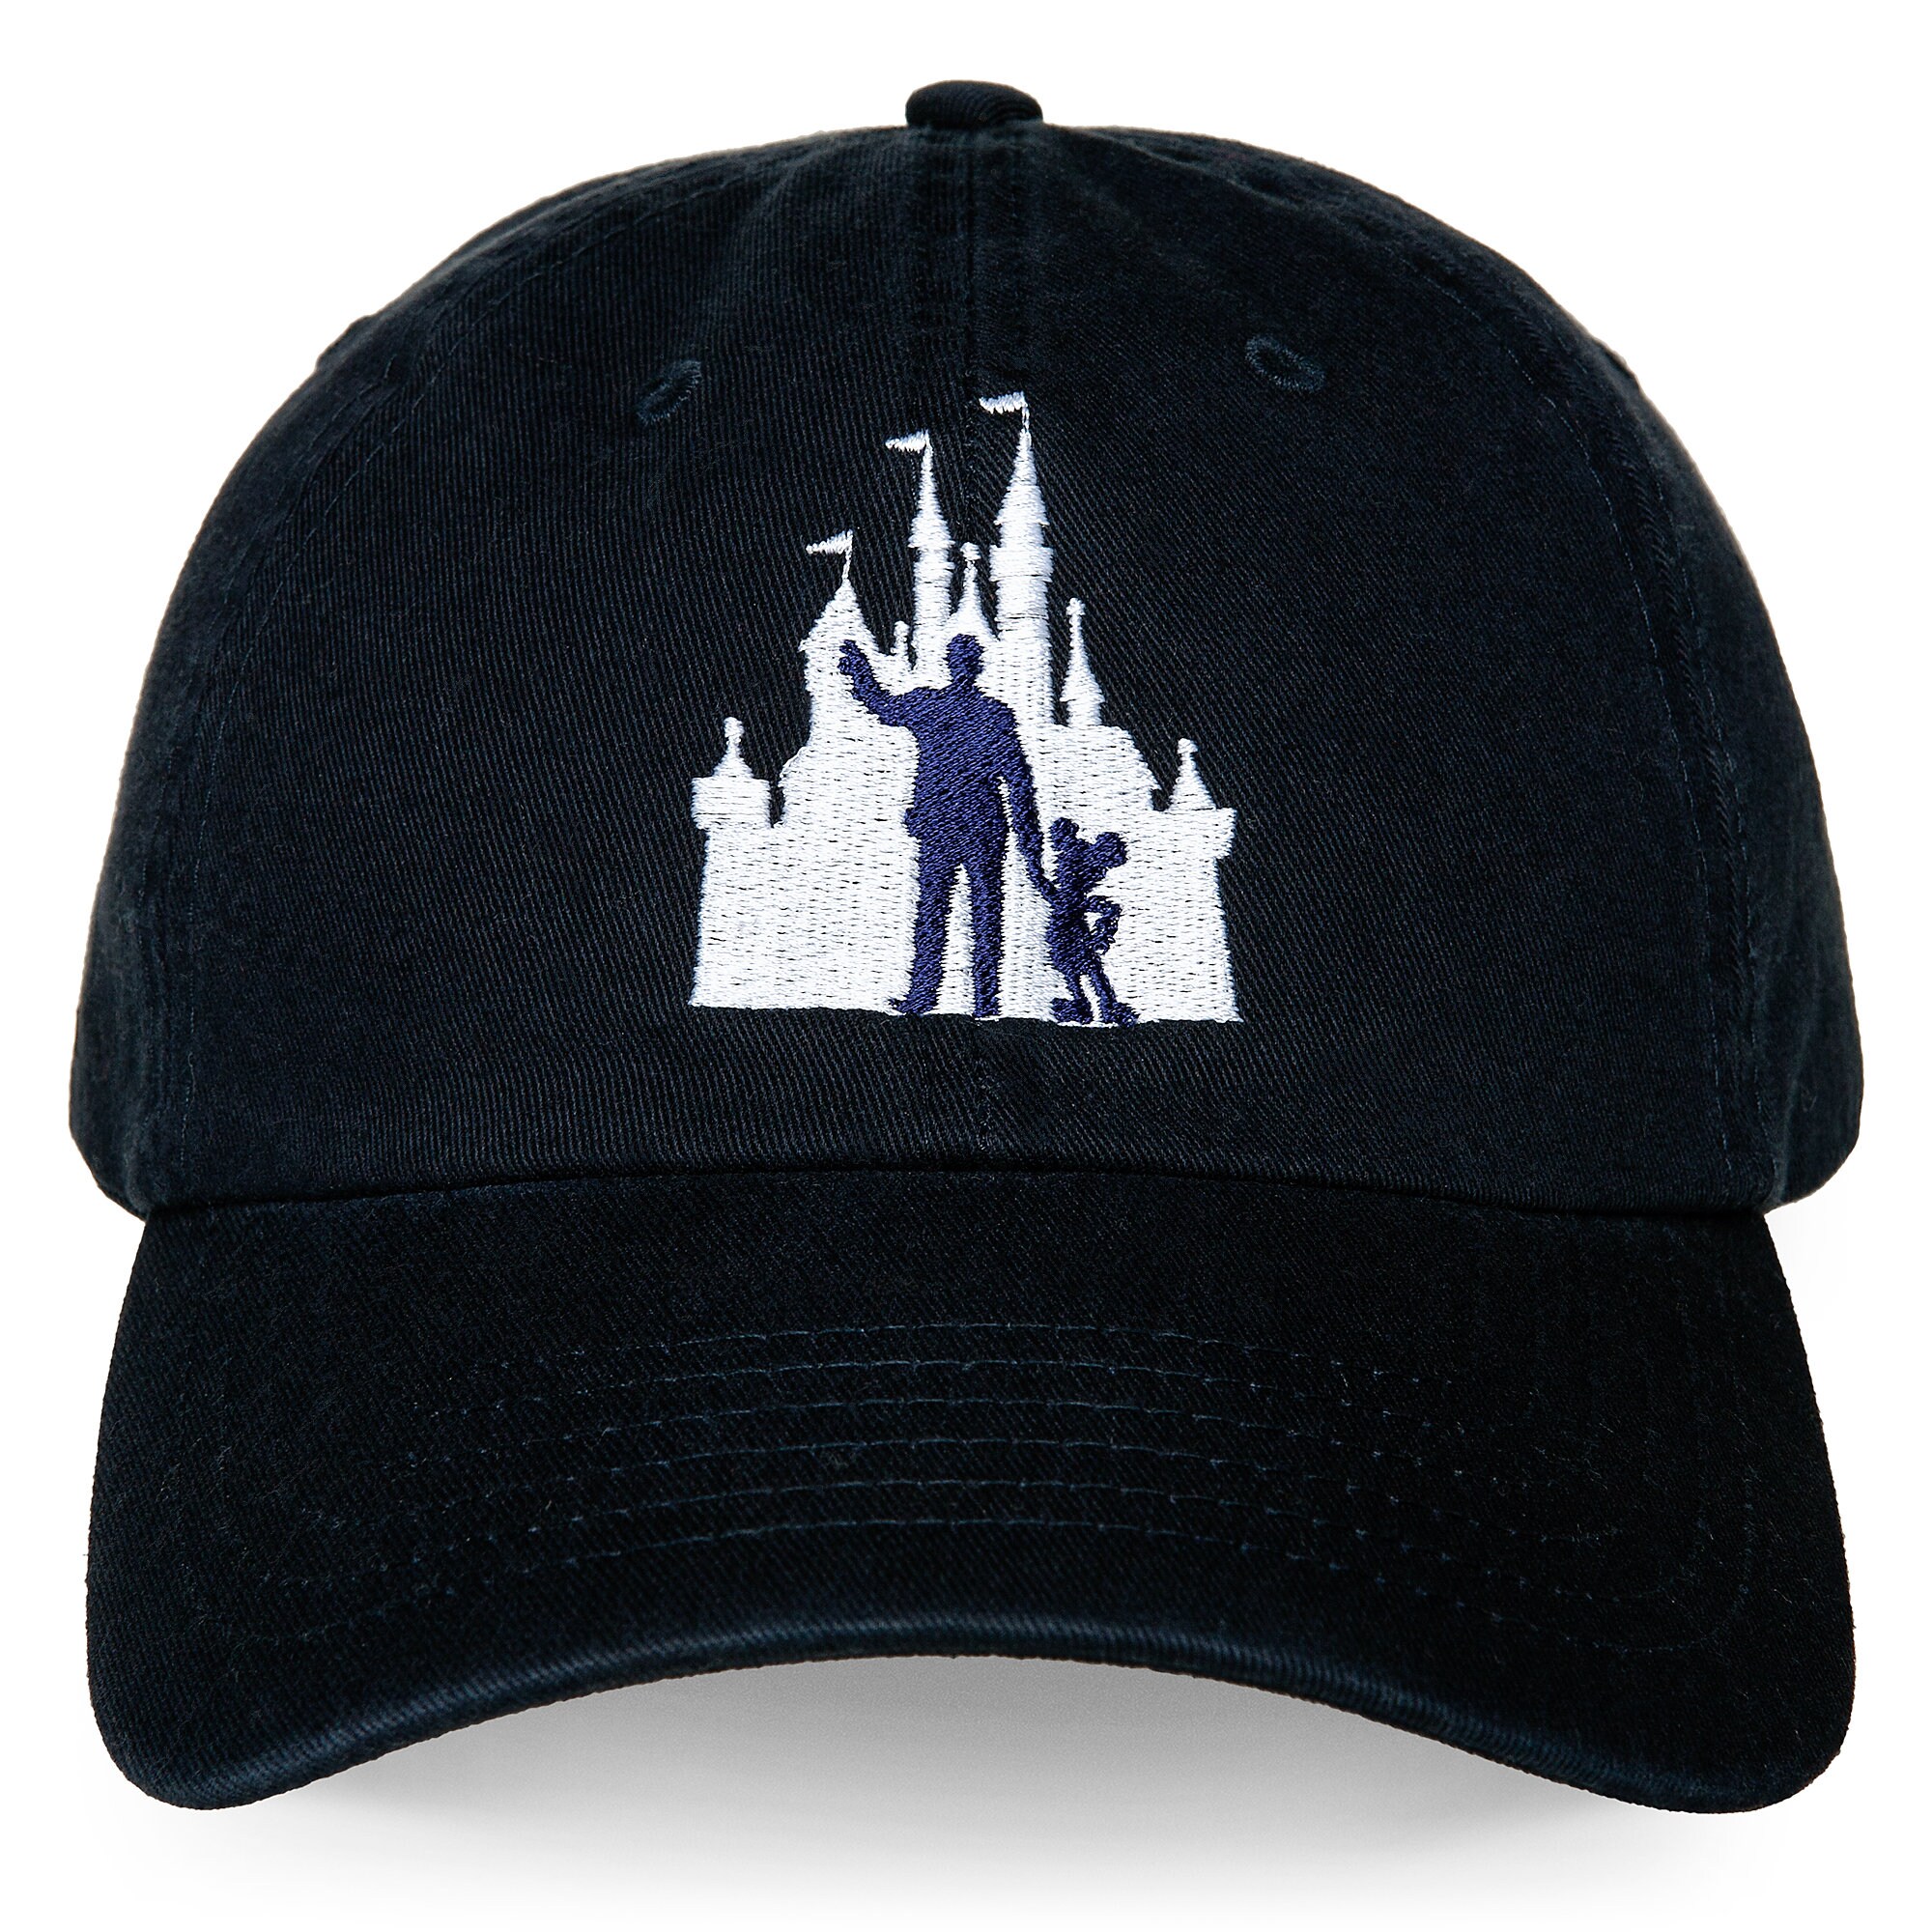 Mickey Mouse and Walt Disney Baseball Cap for Adults